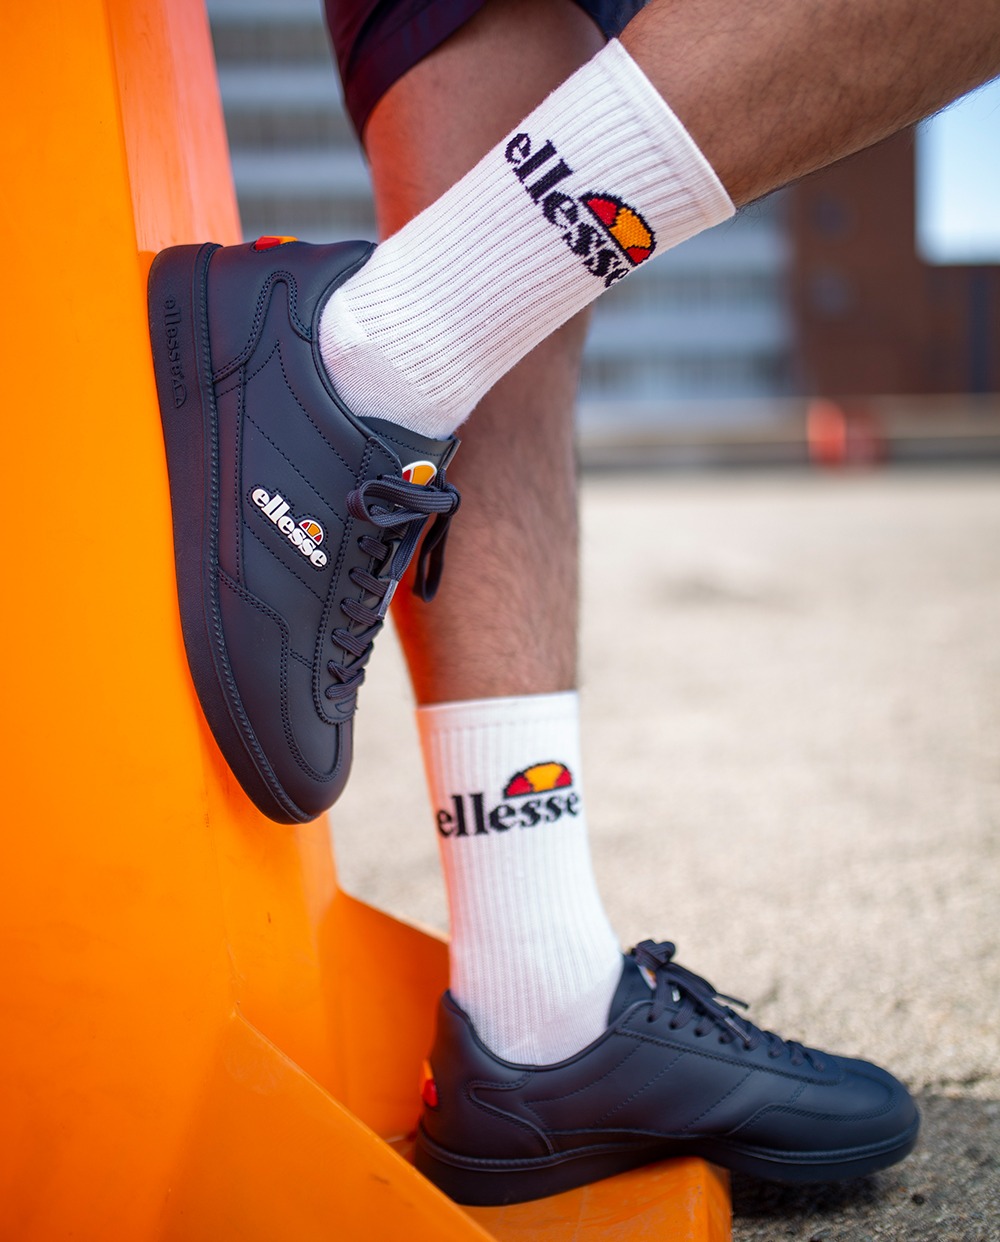 ellesse South on Twitter: "Set the in ellesse Calcio sneakers! Available for Men, Ladies, Youth, Kids &amp; Infants! #ellesse https://t.co/n57CmNY3br" / Twitter